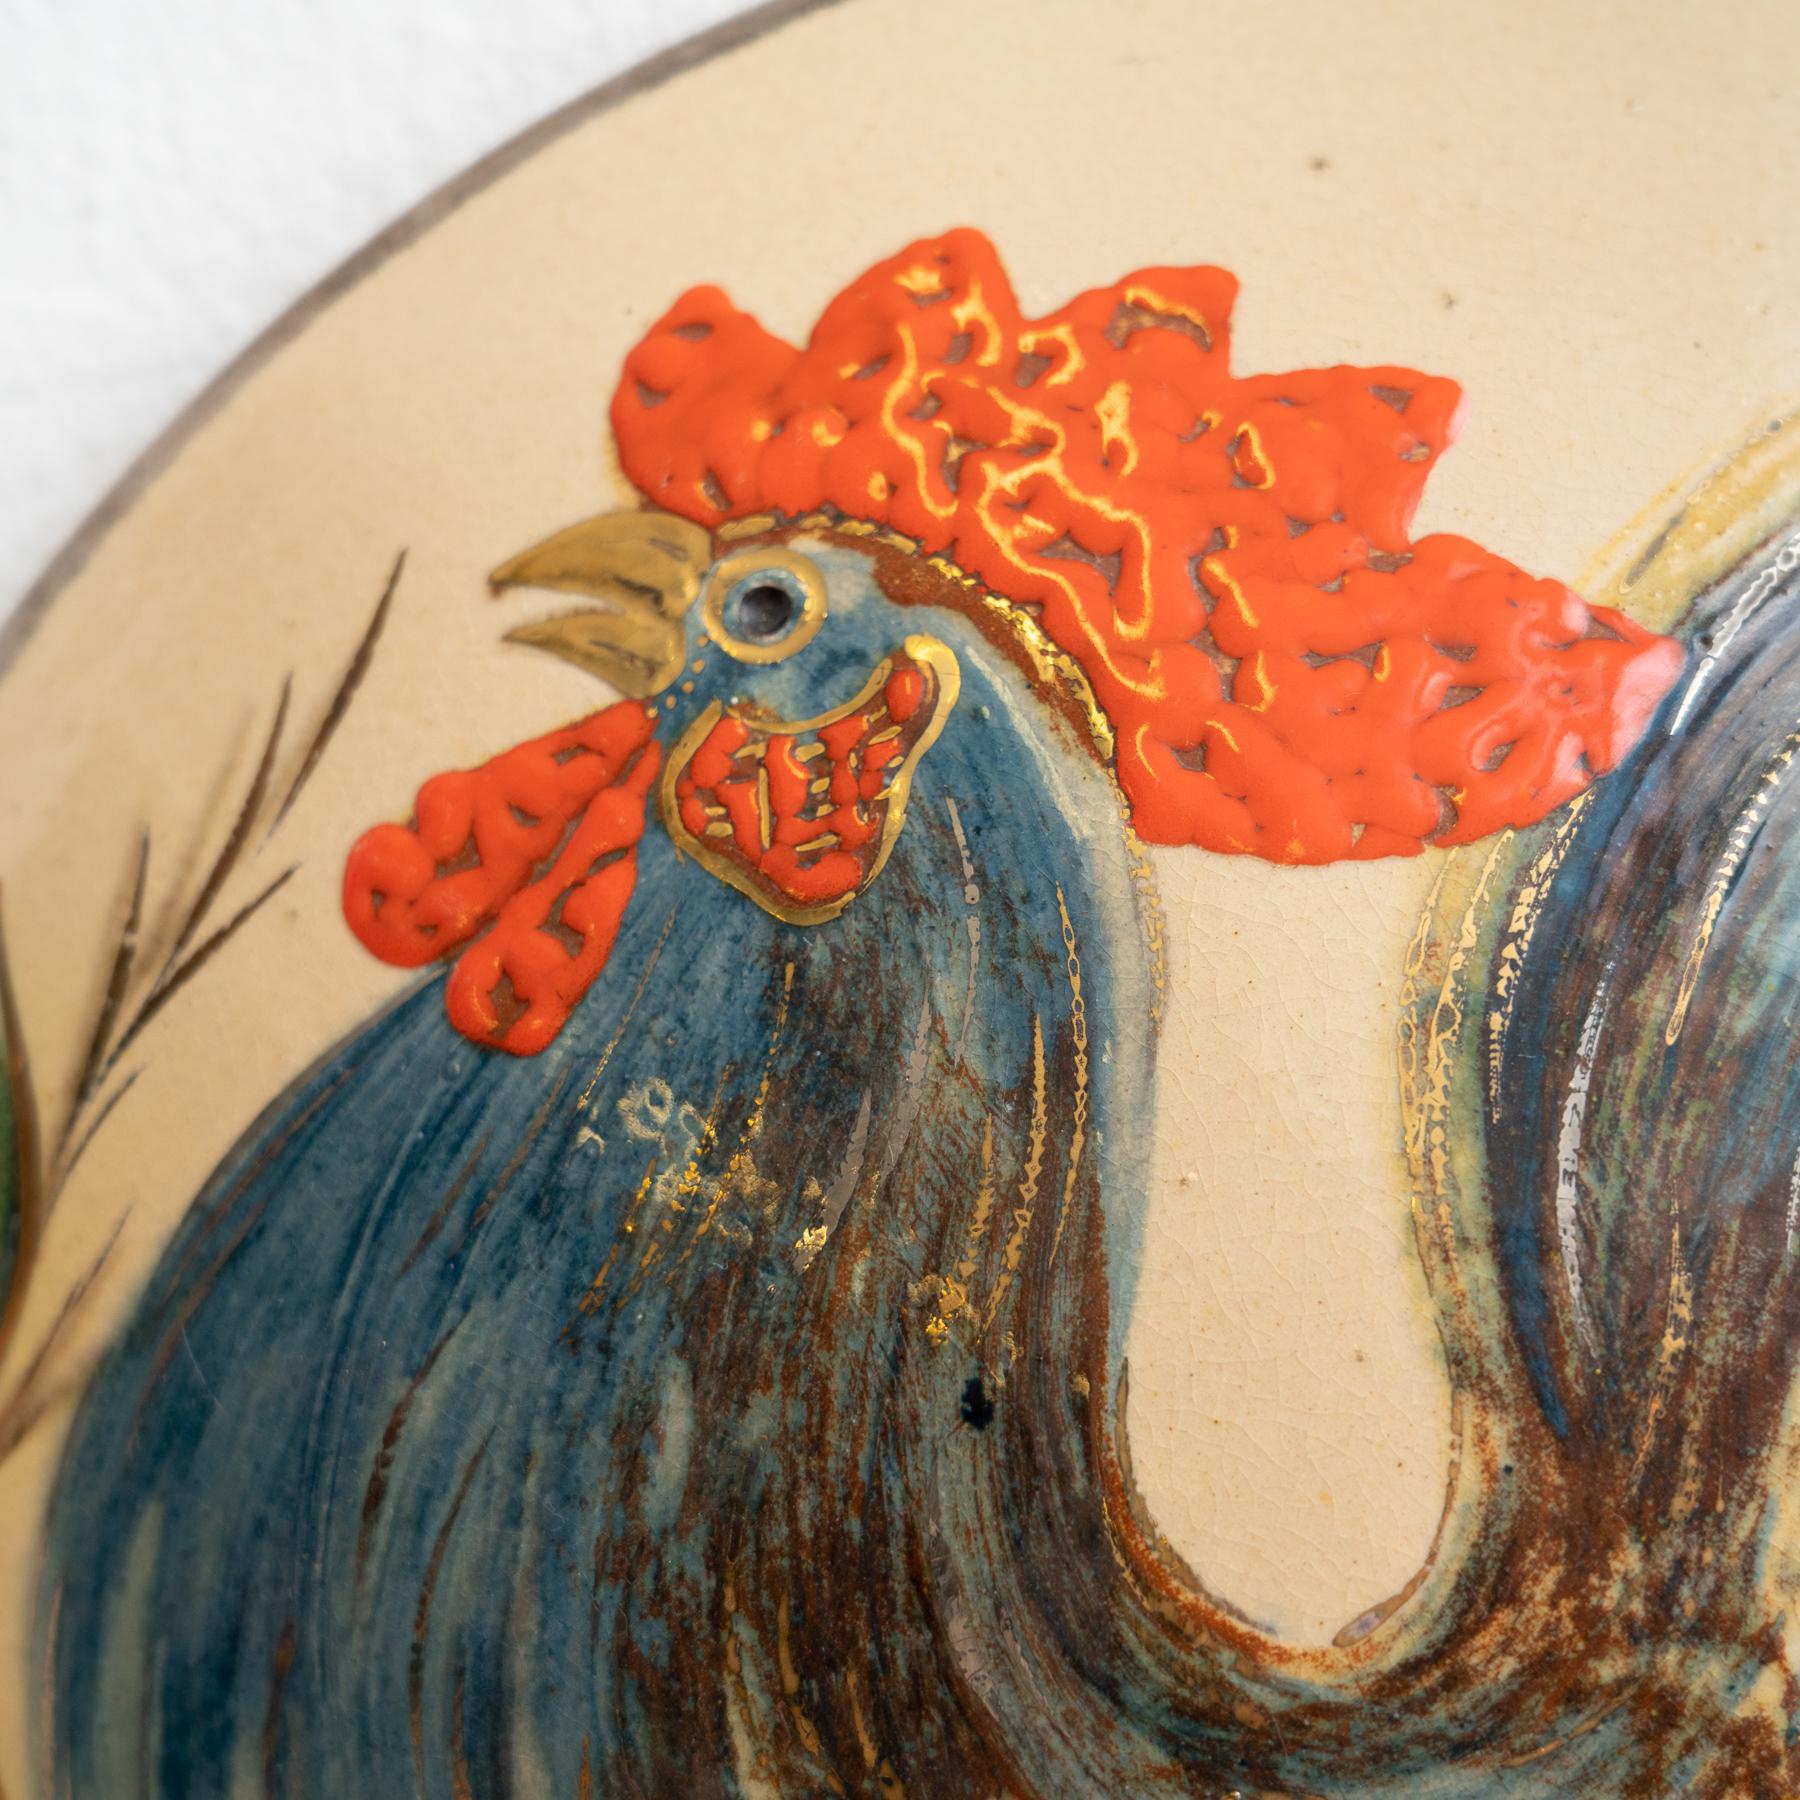 Spanish Ceramic Traditional Hand Painted Plate by Catalan Artist Diaz Costa, circa 1960